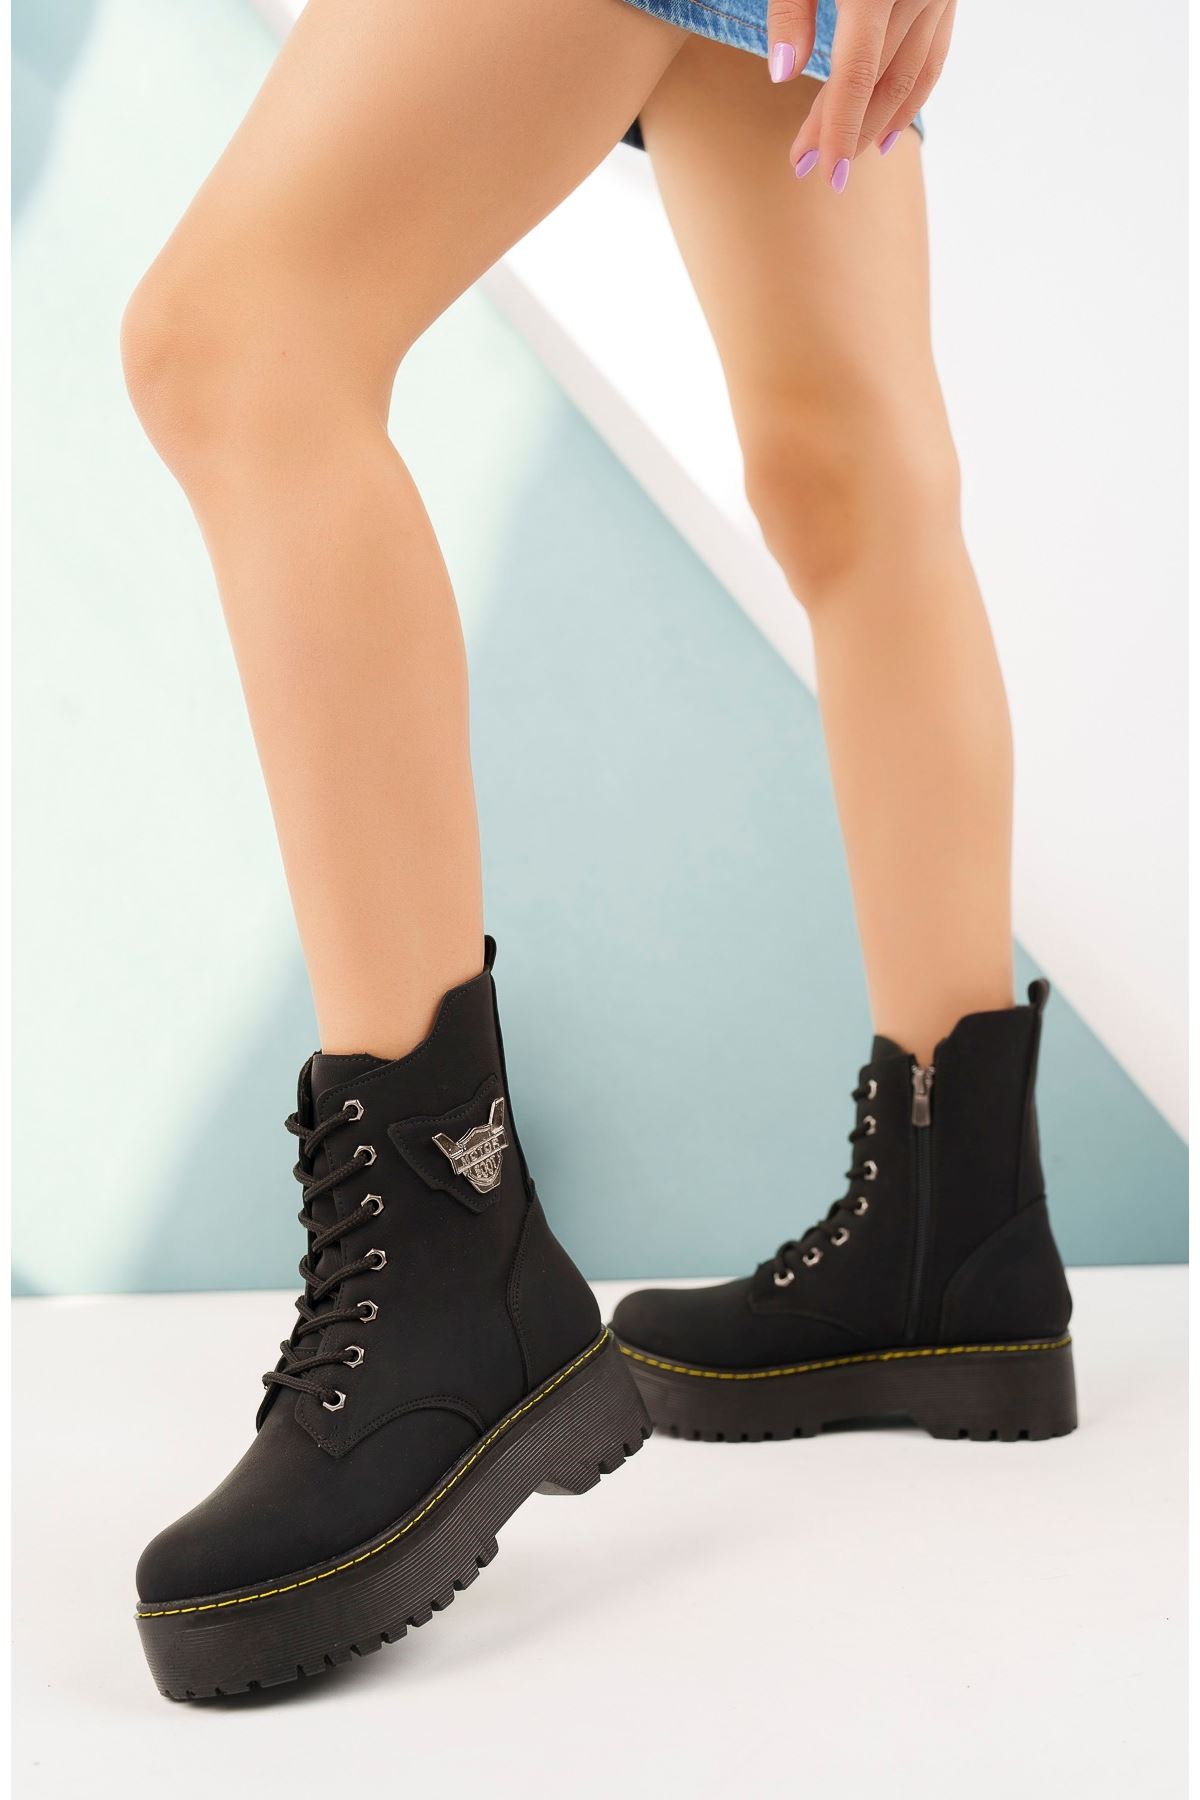 Filled Sole Black Emerald Women's Ankle Boots